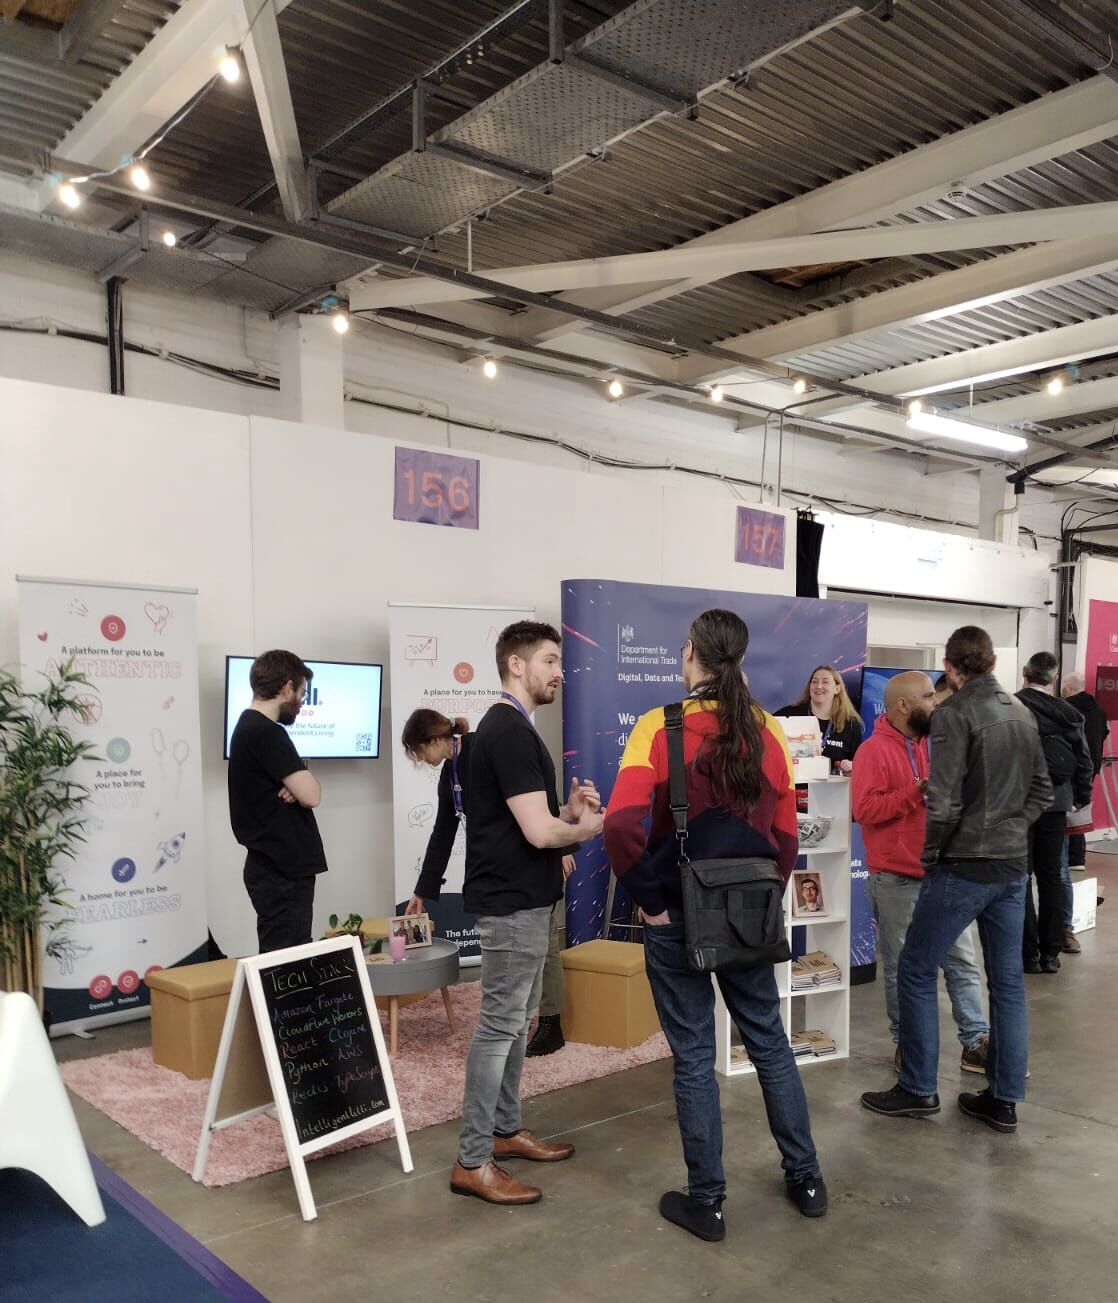 Team Lilli at Silicon MilkRoundabout job fair for building a career